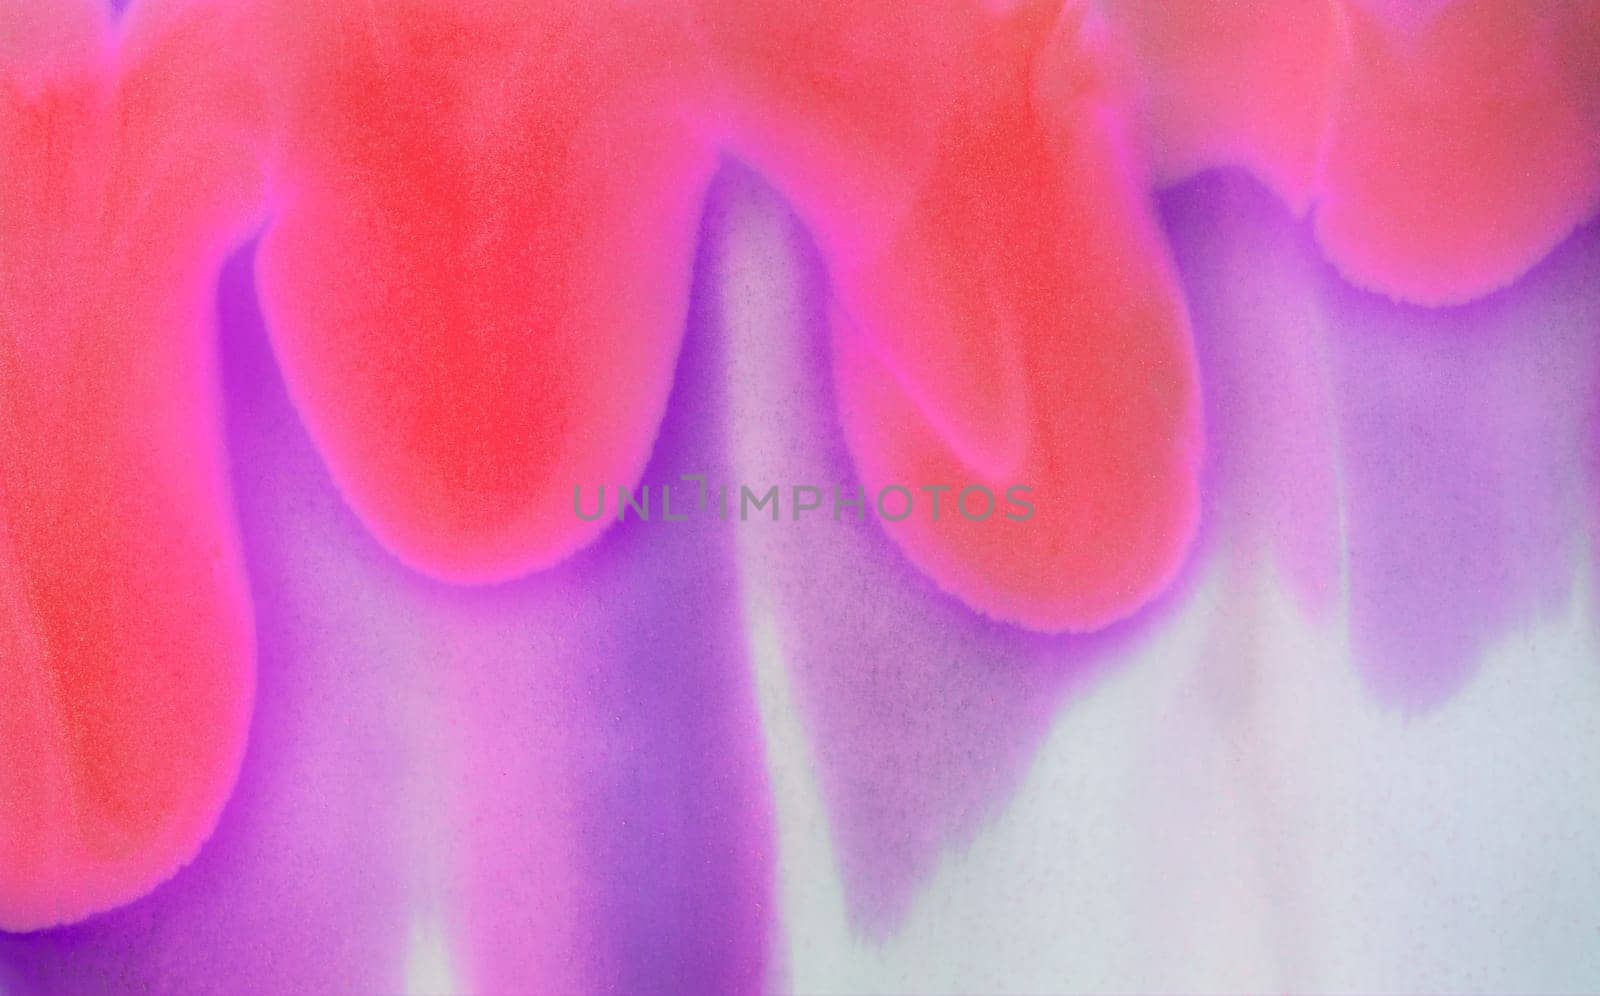 Closeup of the painting. Colorful abstract painting background. Highly-textured oil paint. High quality details. Marble texture. Paint splash. Colorful fluid.